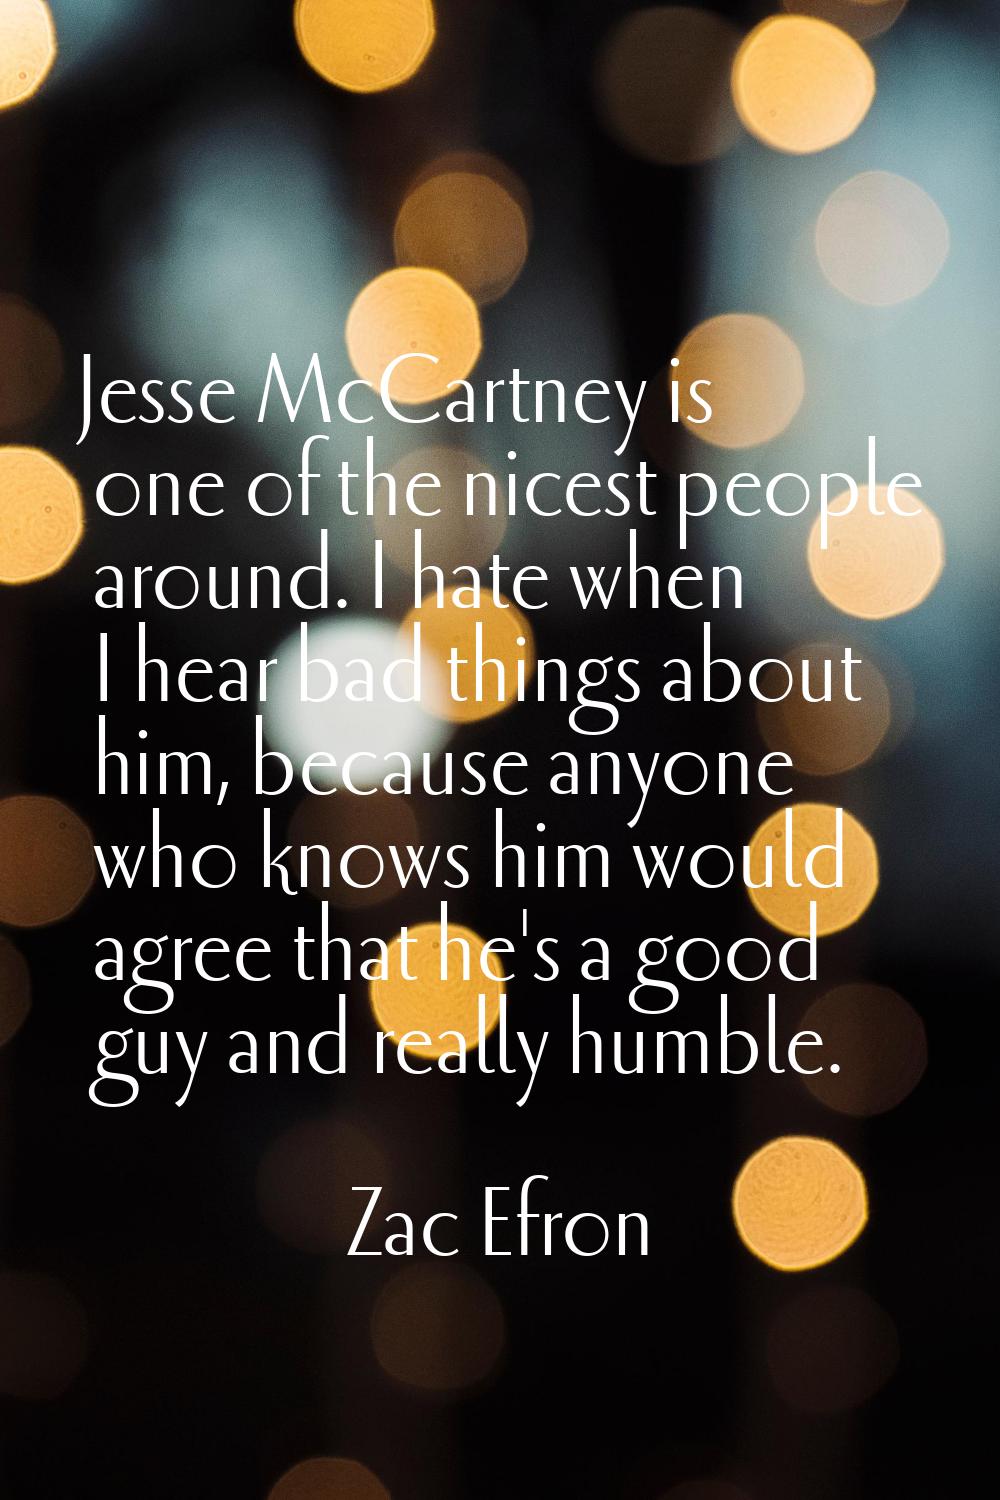 Jesse McCartney is one of the nicest people around. I hate when I hear bad things about him, becaus